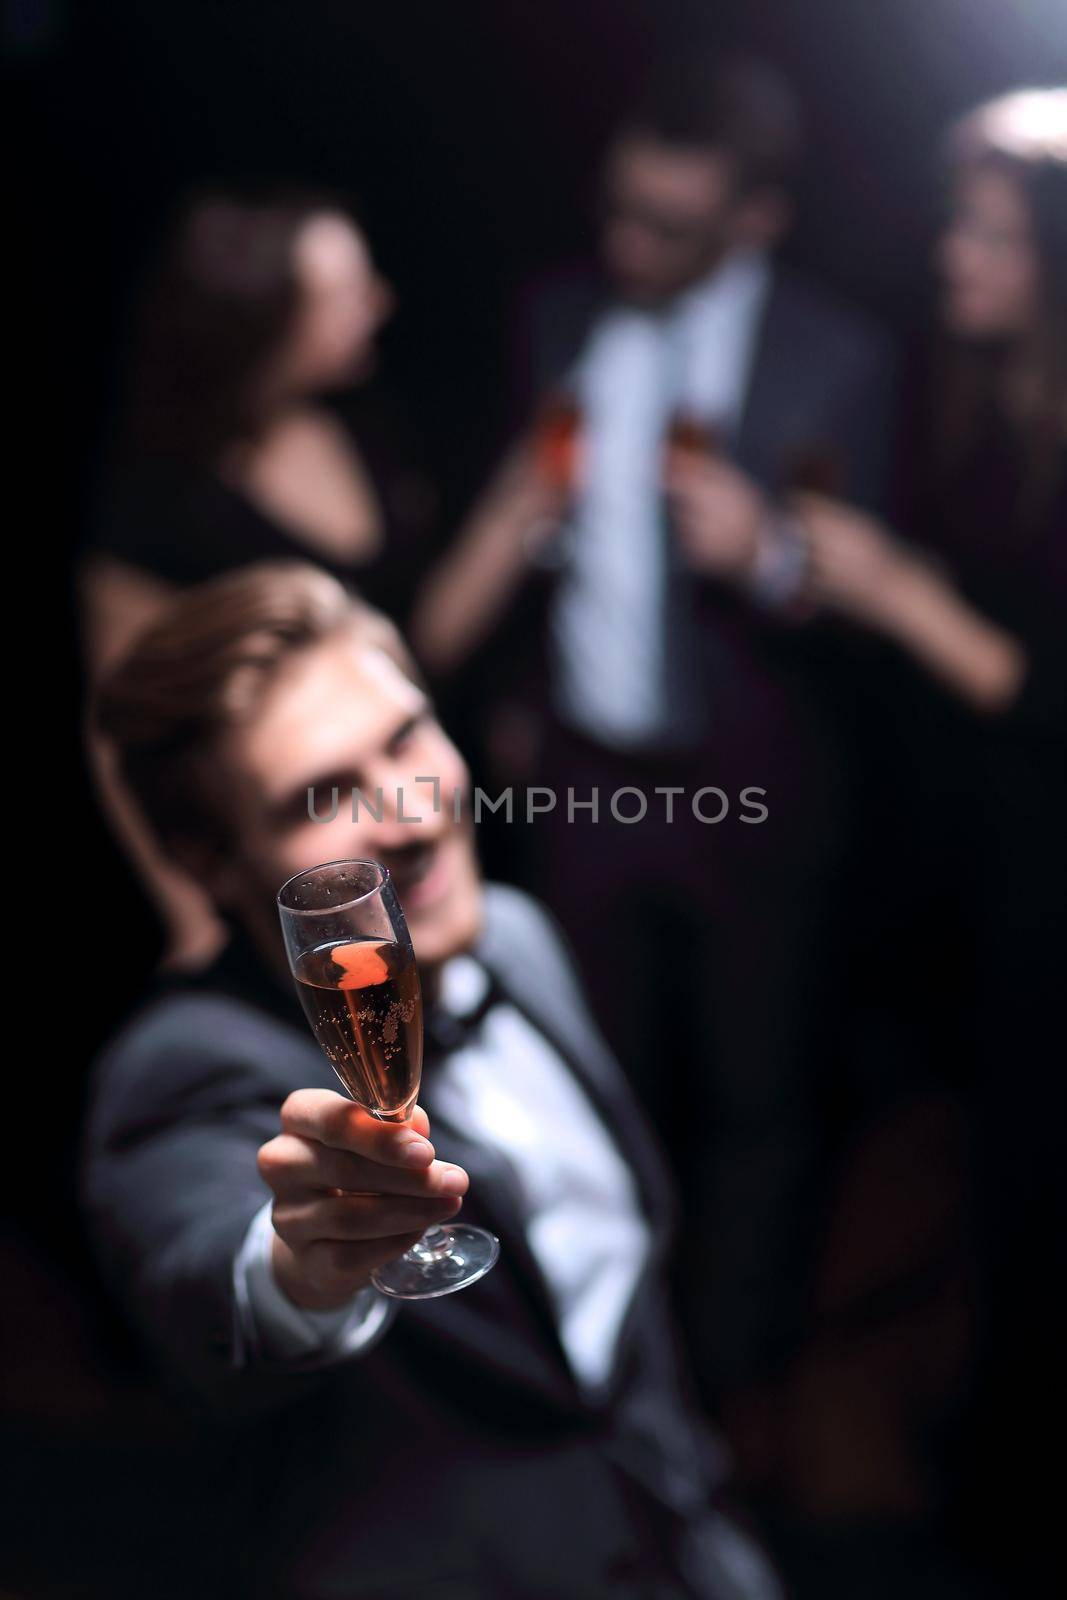 stylish young man standing with a glass of champagne.holidays and events